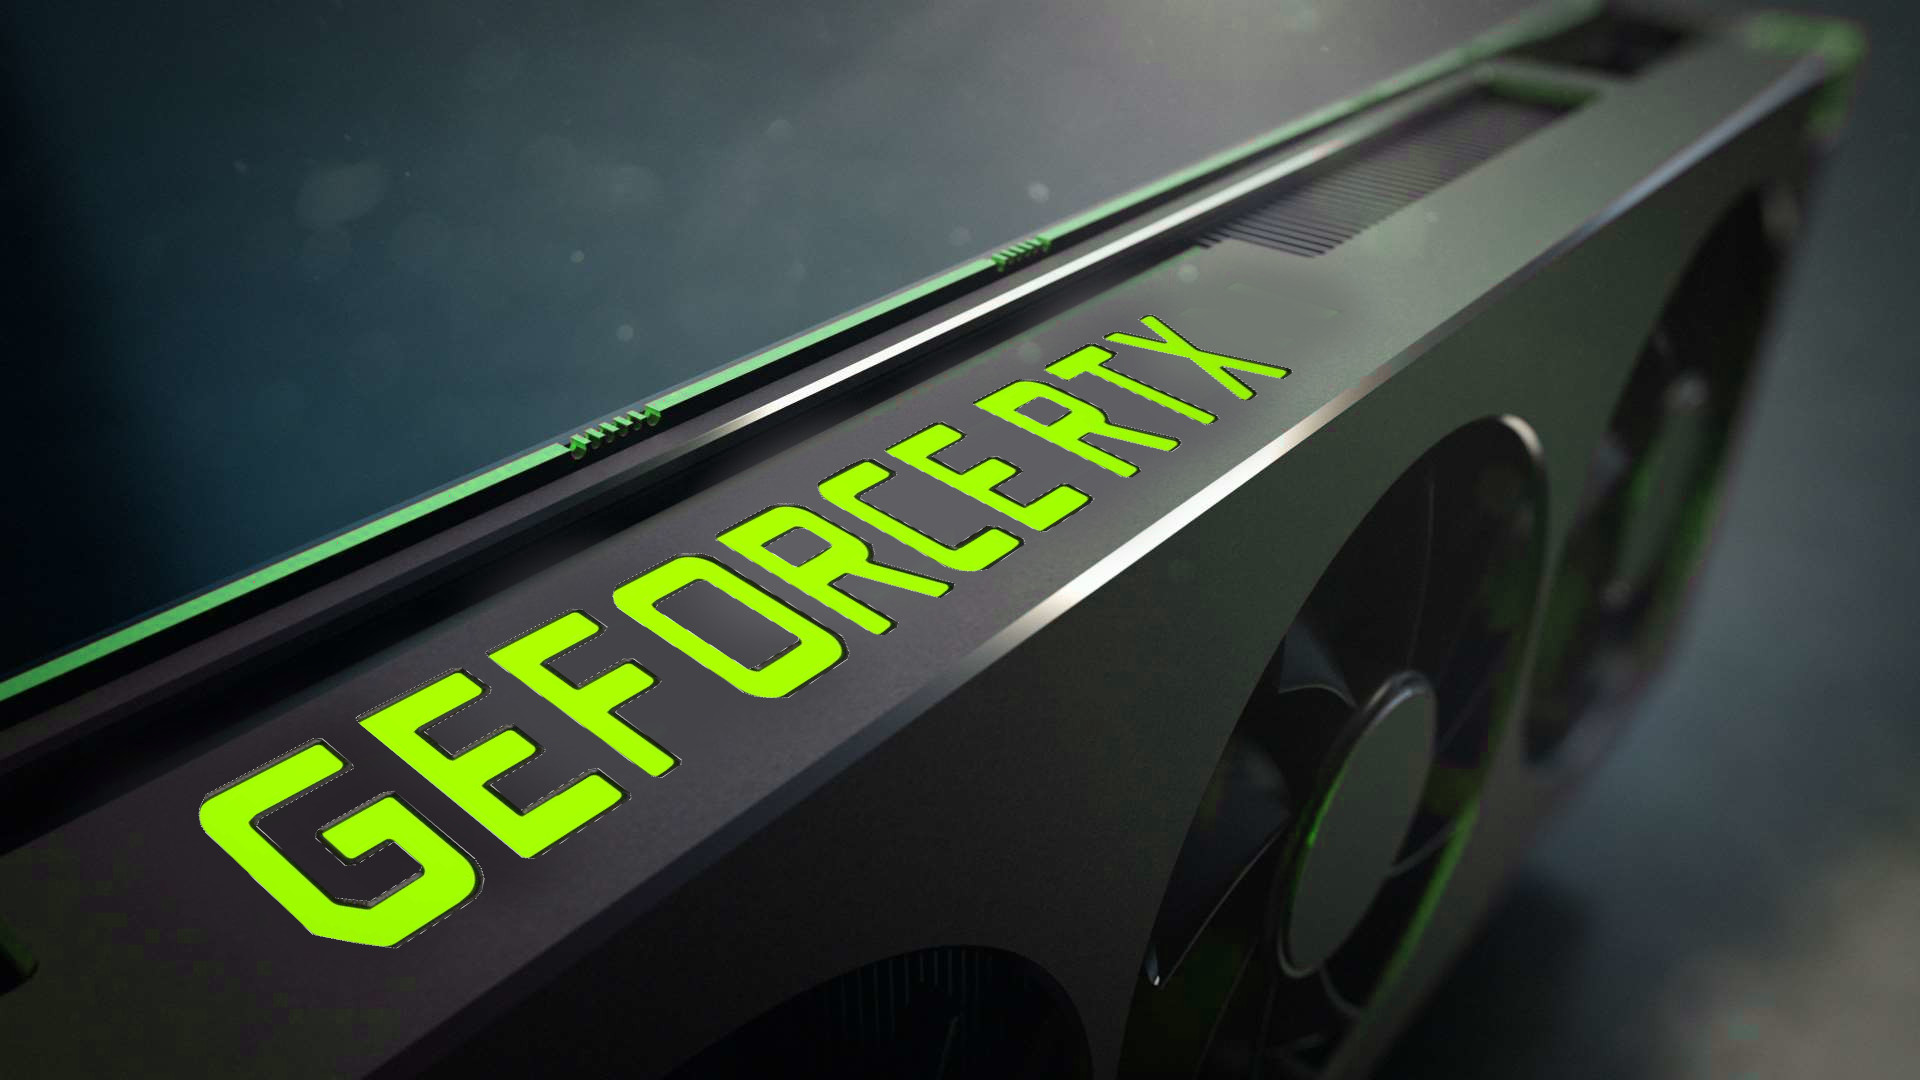 Nvidia could up RTX 3060 production, but for cybercafes rather than your gaming PC